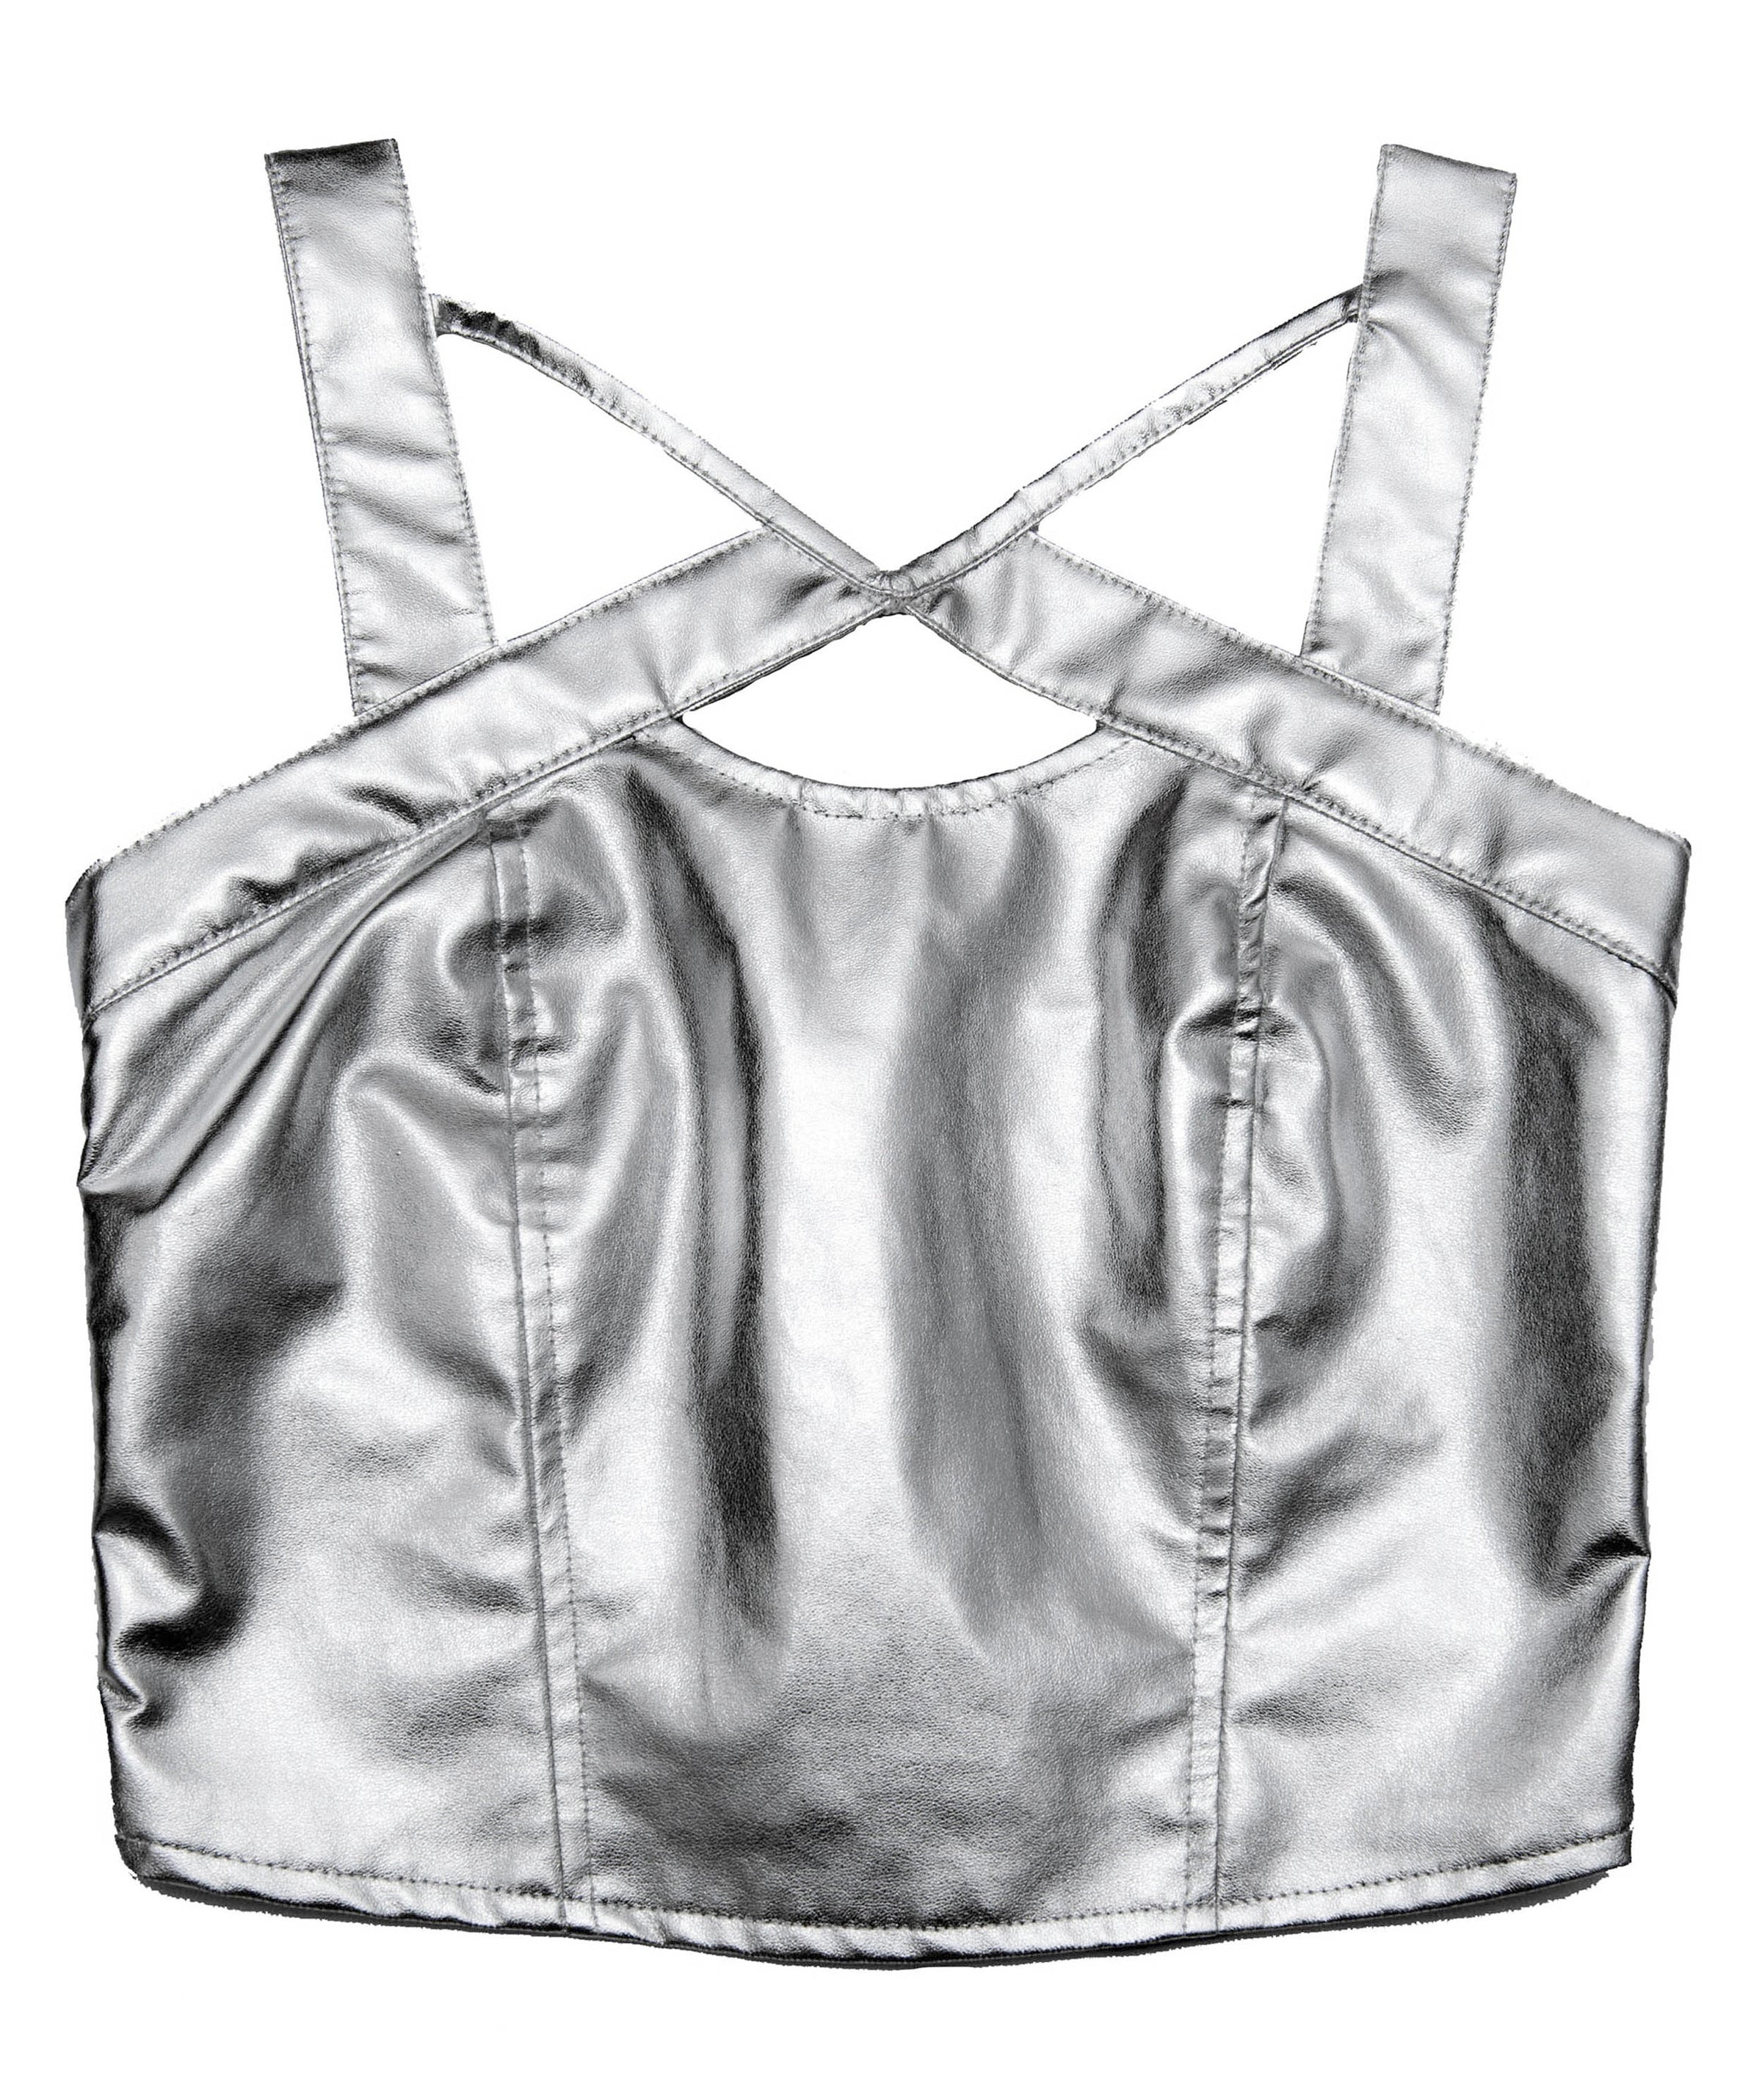  Dreay Silver Corset Tops for Women Metallic Leather